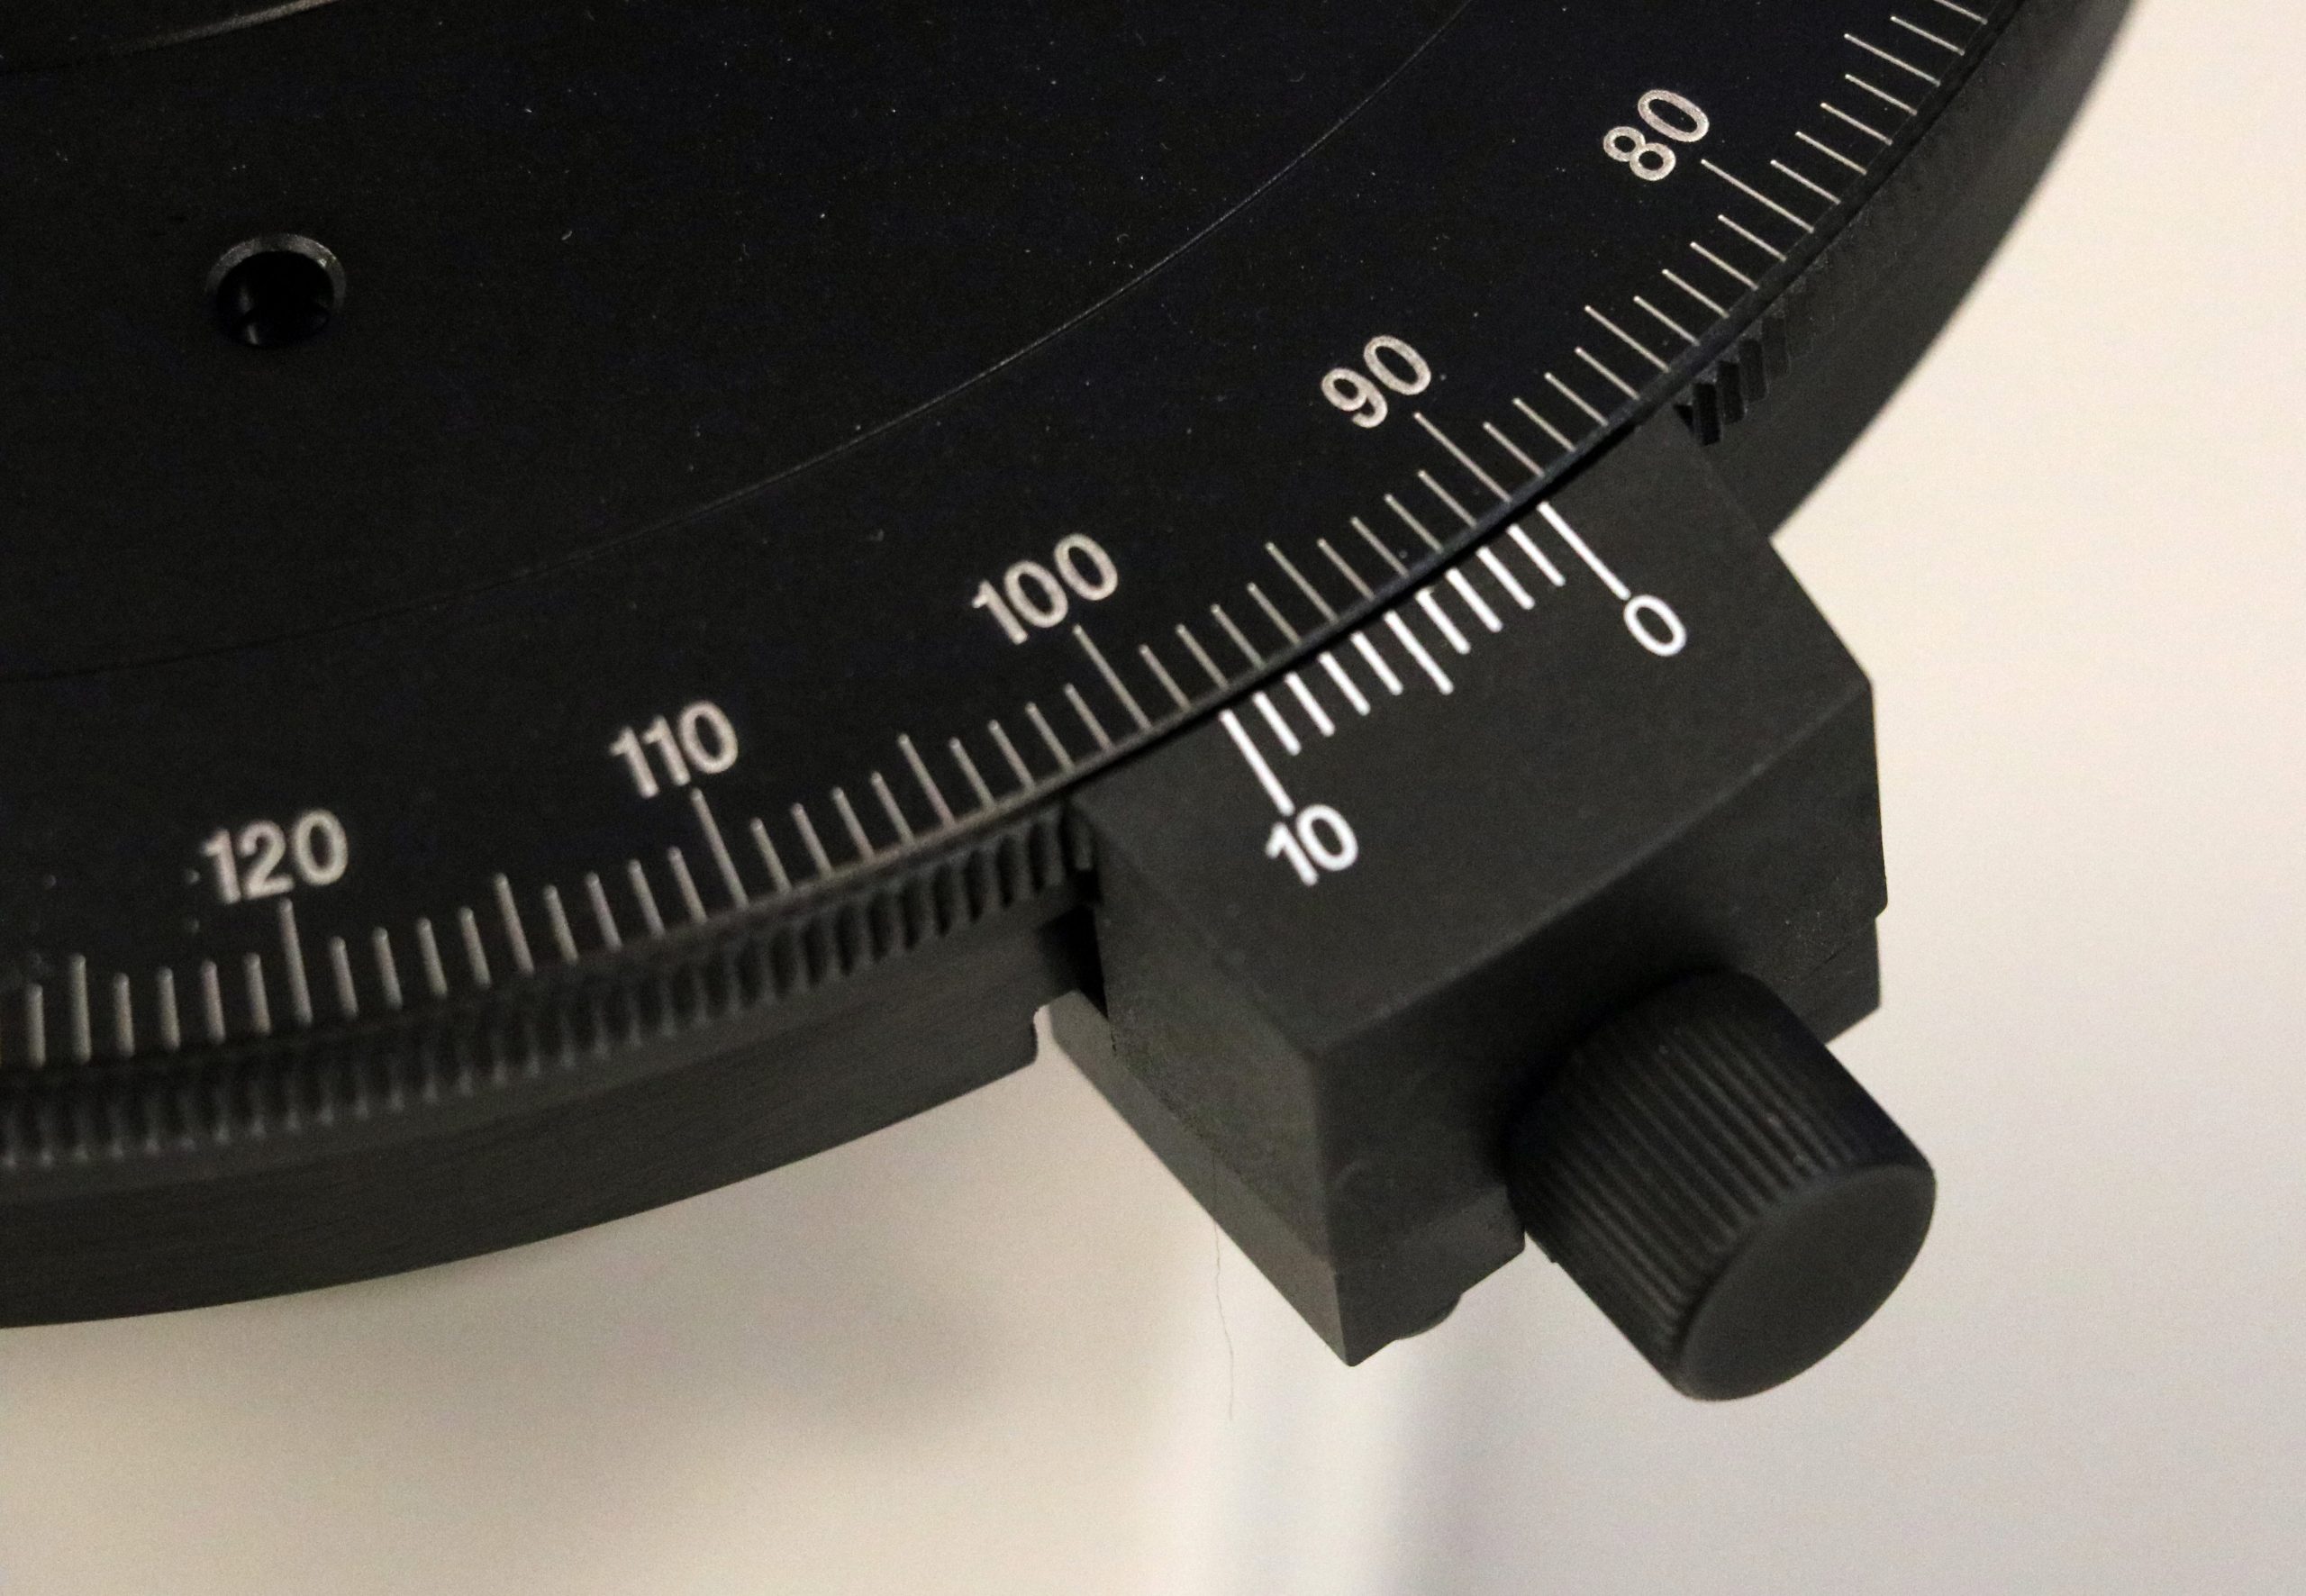 Figure 2.4.8. The vernier and goniometer on the rotating stage.